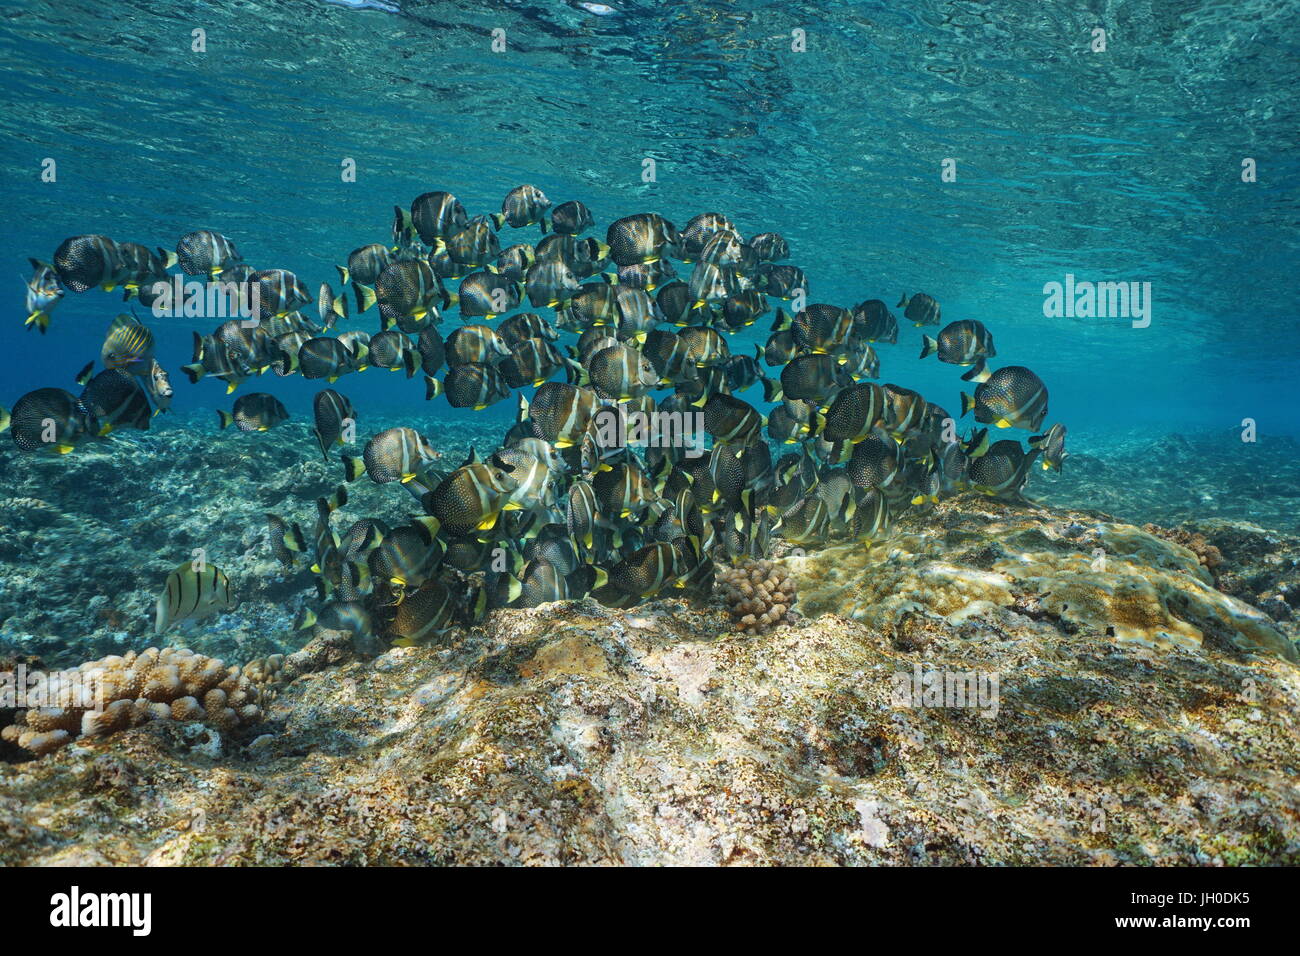 A school of fish whitespotted surgeonfish, Acanthurus guttatus, underwater in the Pacific ocean, French Polynesia, Oceania Stock Photo